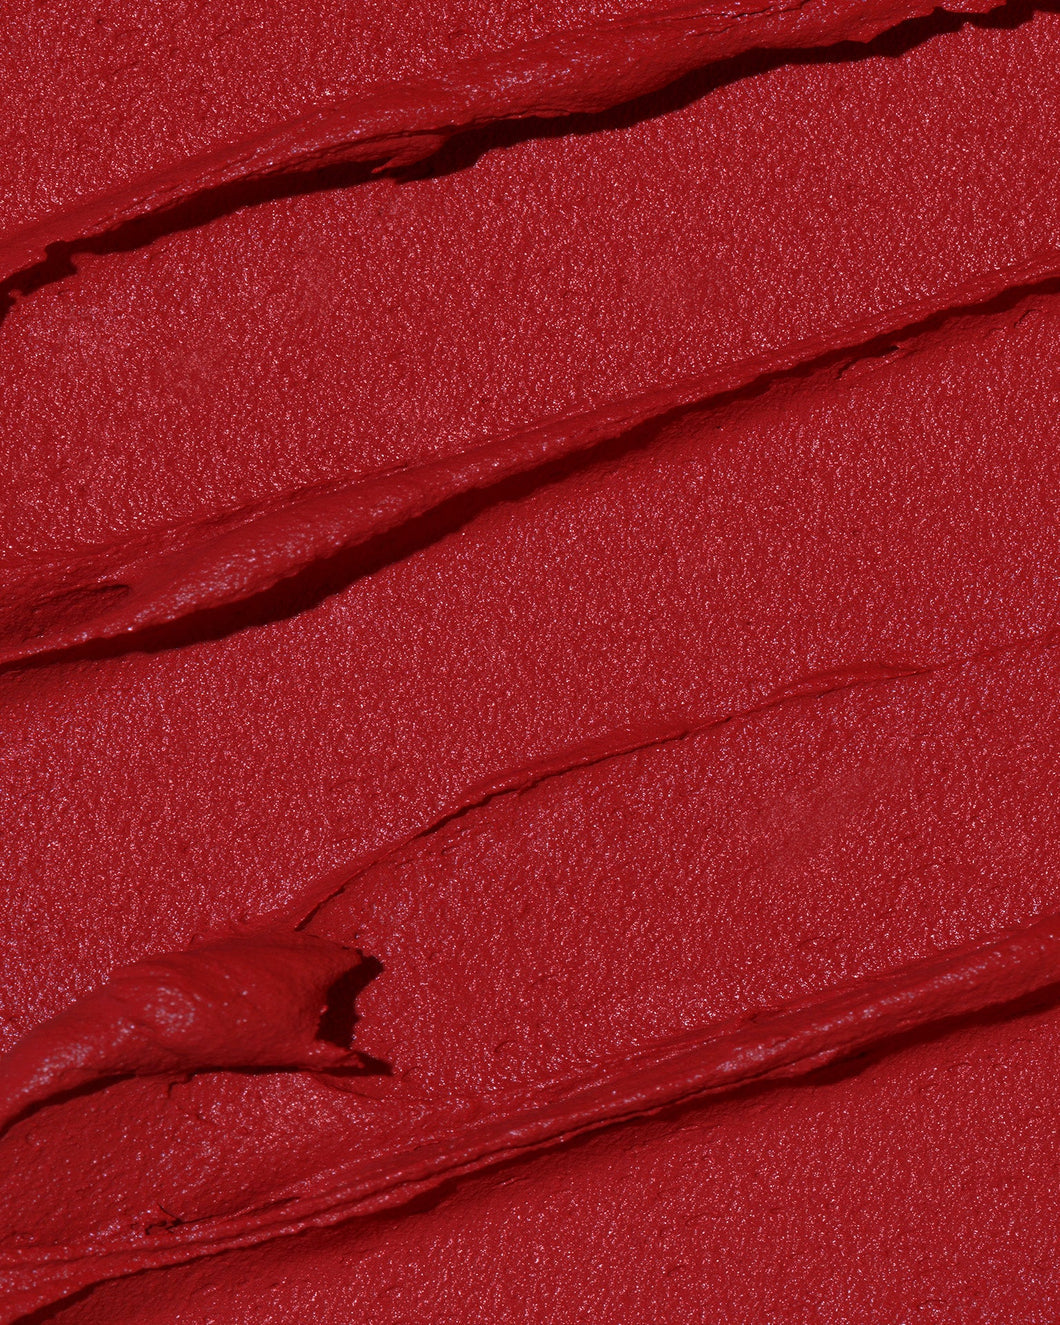 A swatch of the Twin Flame Velvet Mousse Lipstick. This looks so good that you may want a bite.